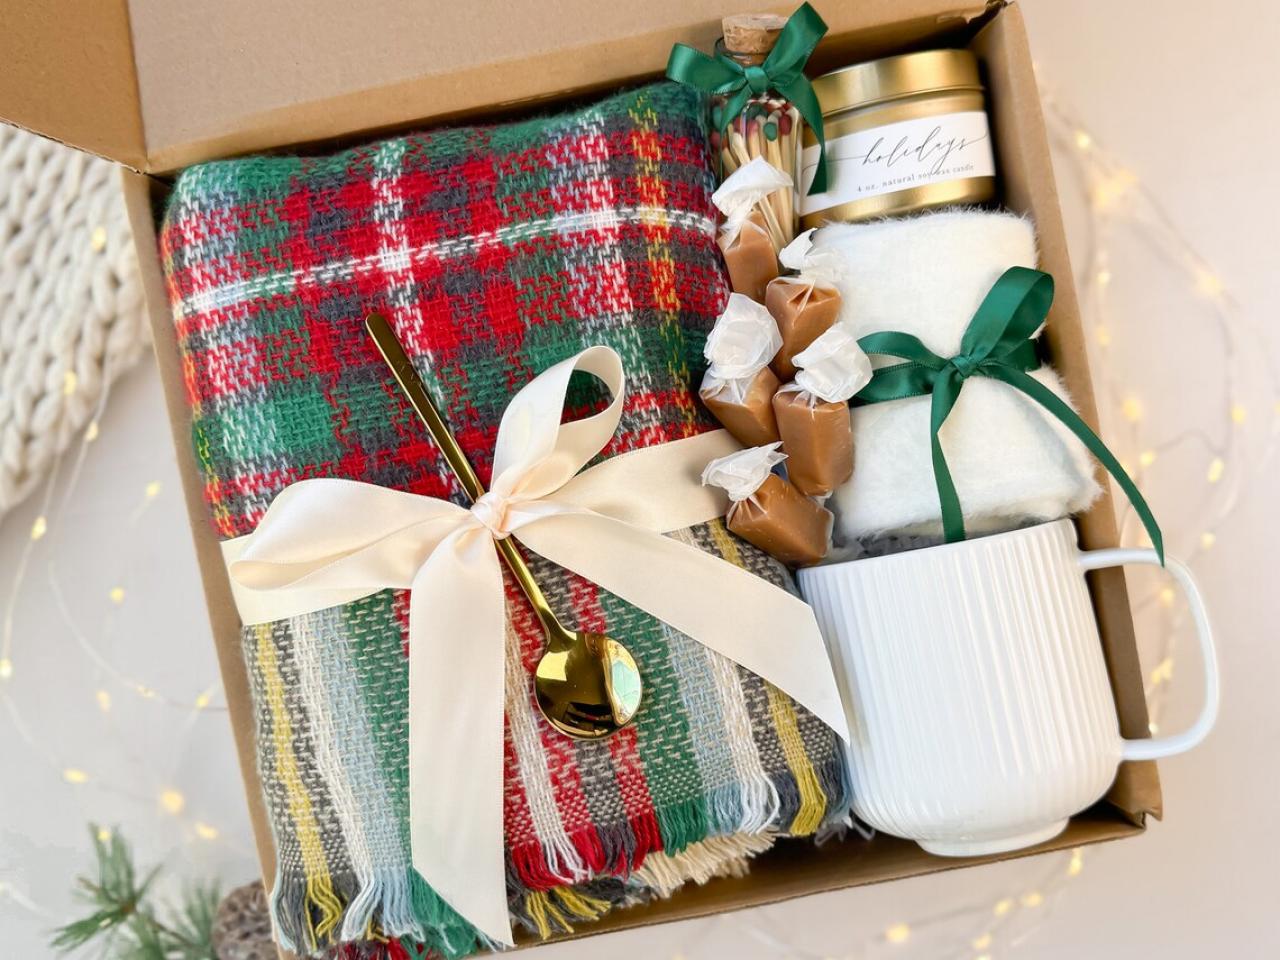 https://hgtvhome.sndimg.com/content/dam/images/hgtv/products/2023/11/20/rx_etsy_hygge-christmas-gift-box.jpeg.rend.hgtvcom.1280.960.suffix/1700512508898.jpeg